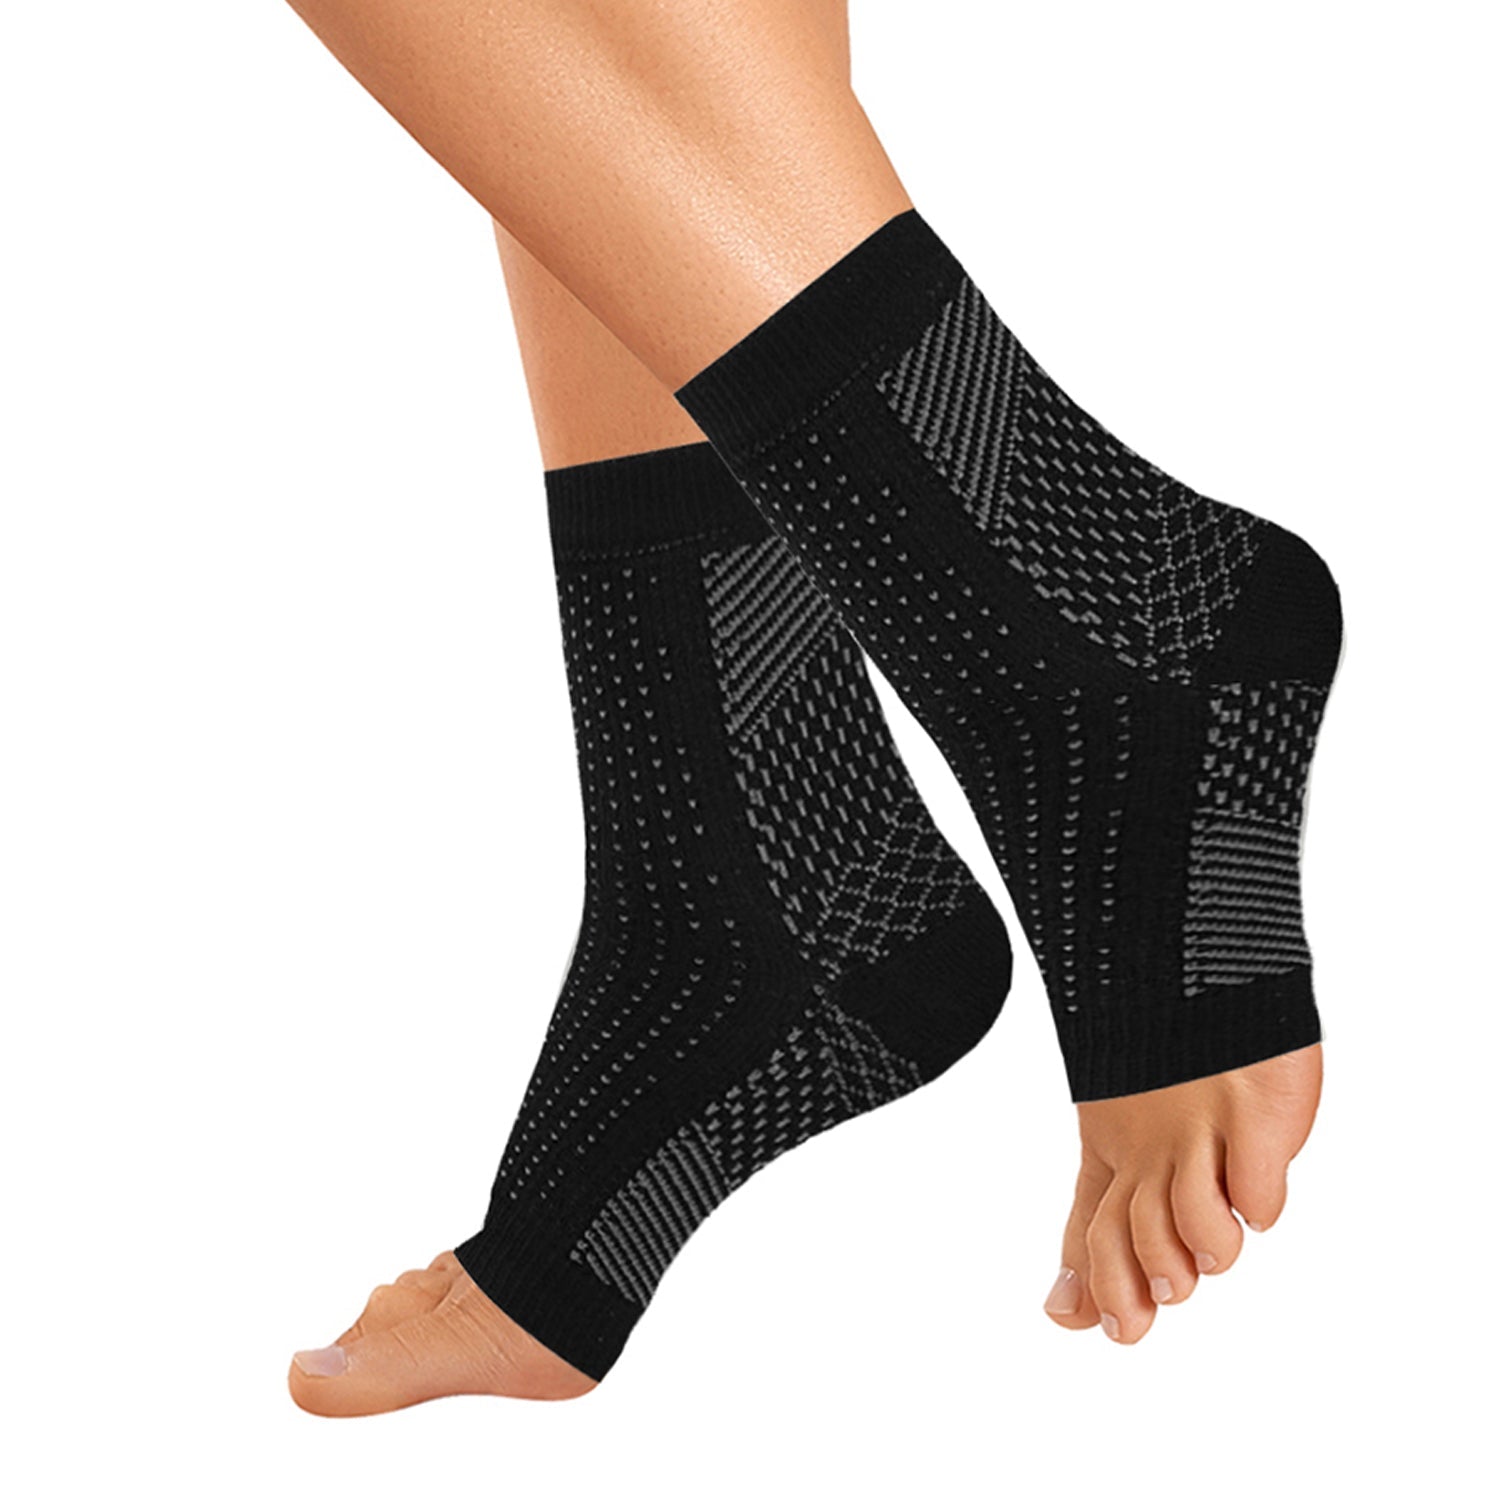 Copper Compression Foot Sleeves for Recovery - 1 Pair